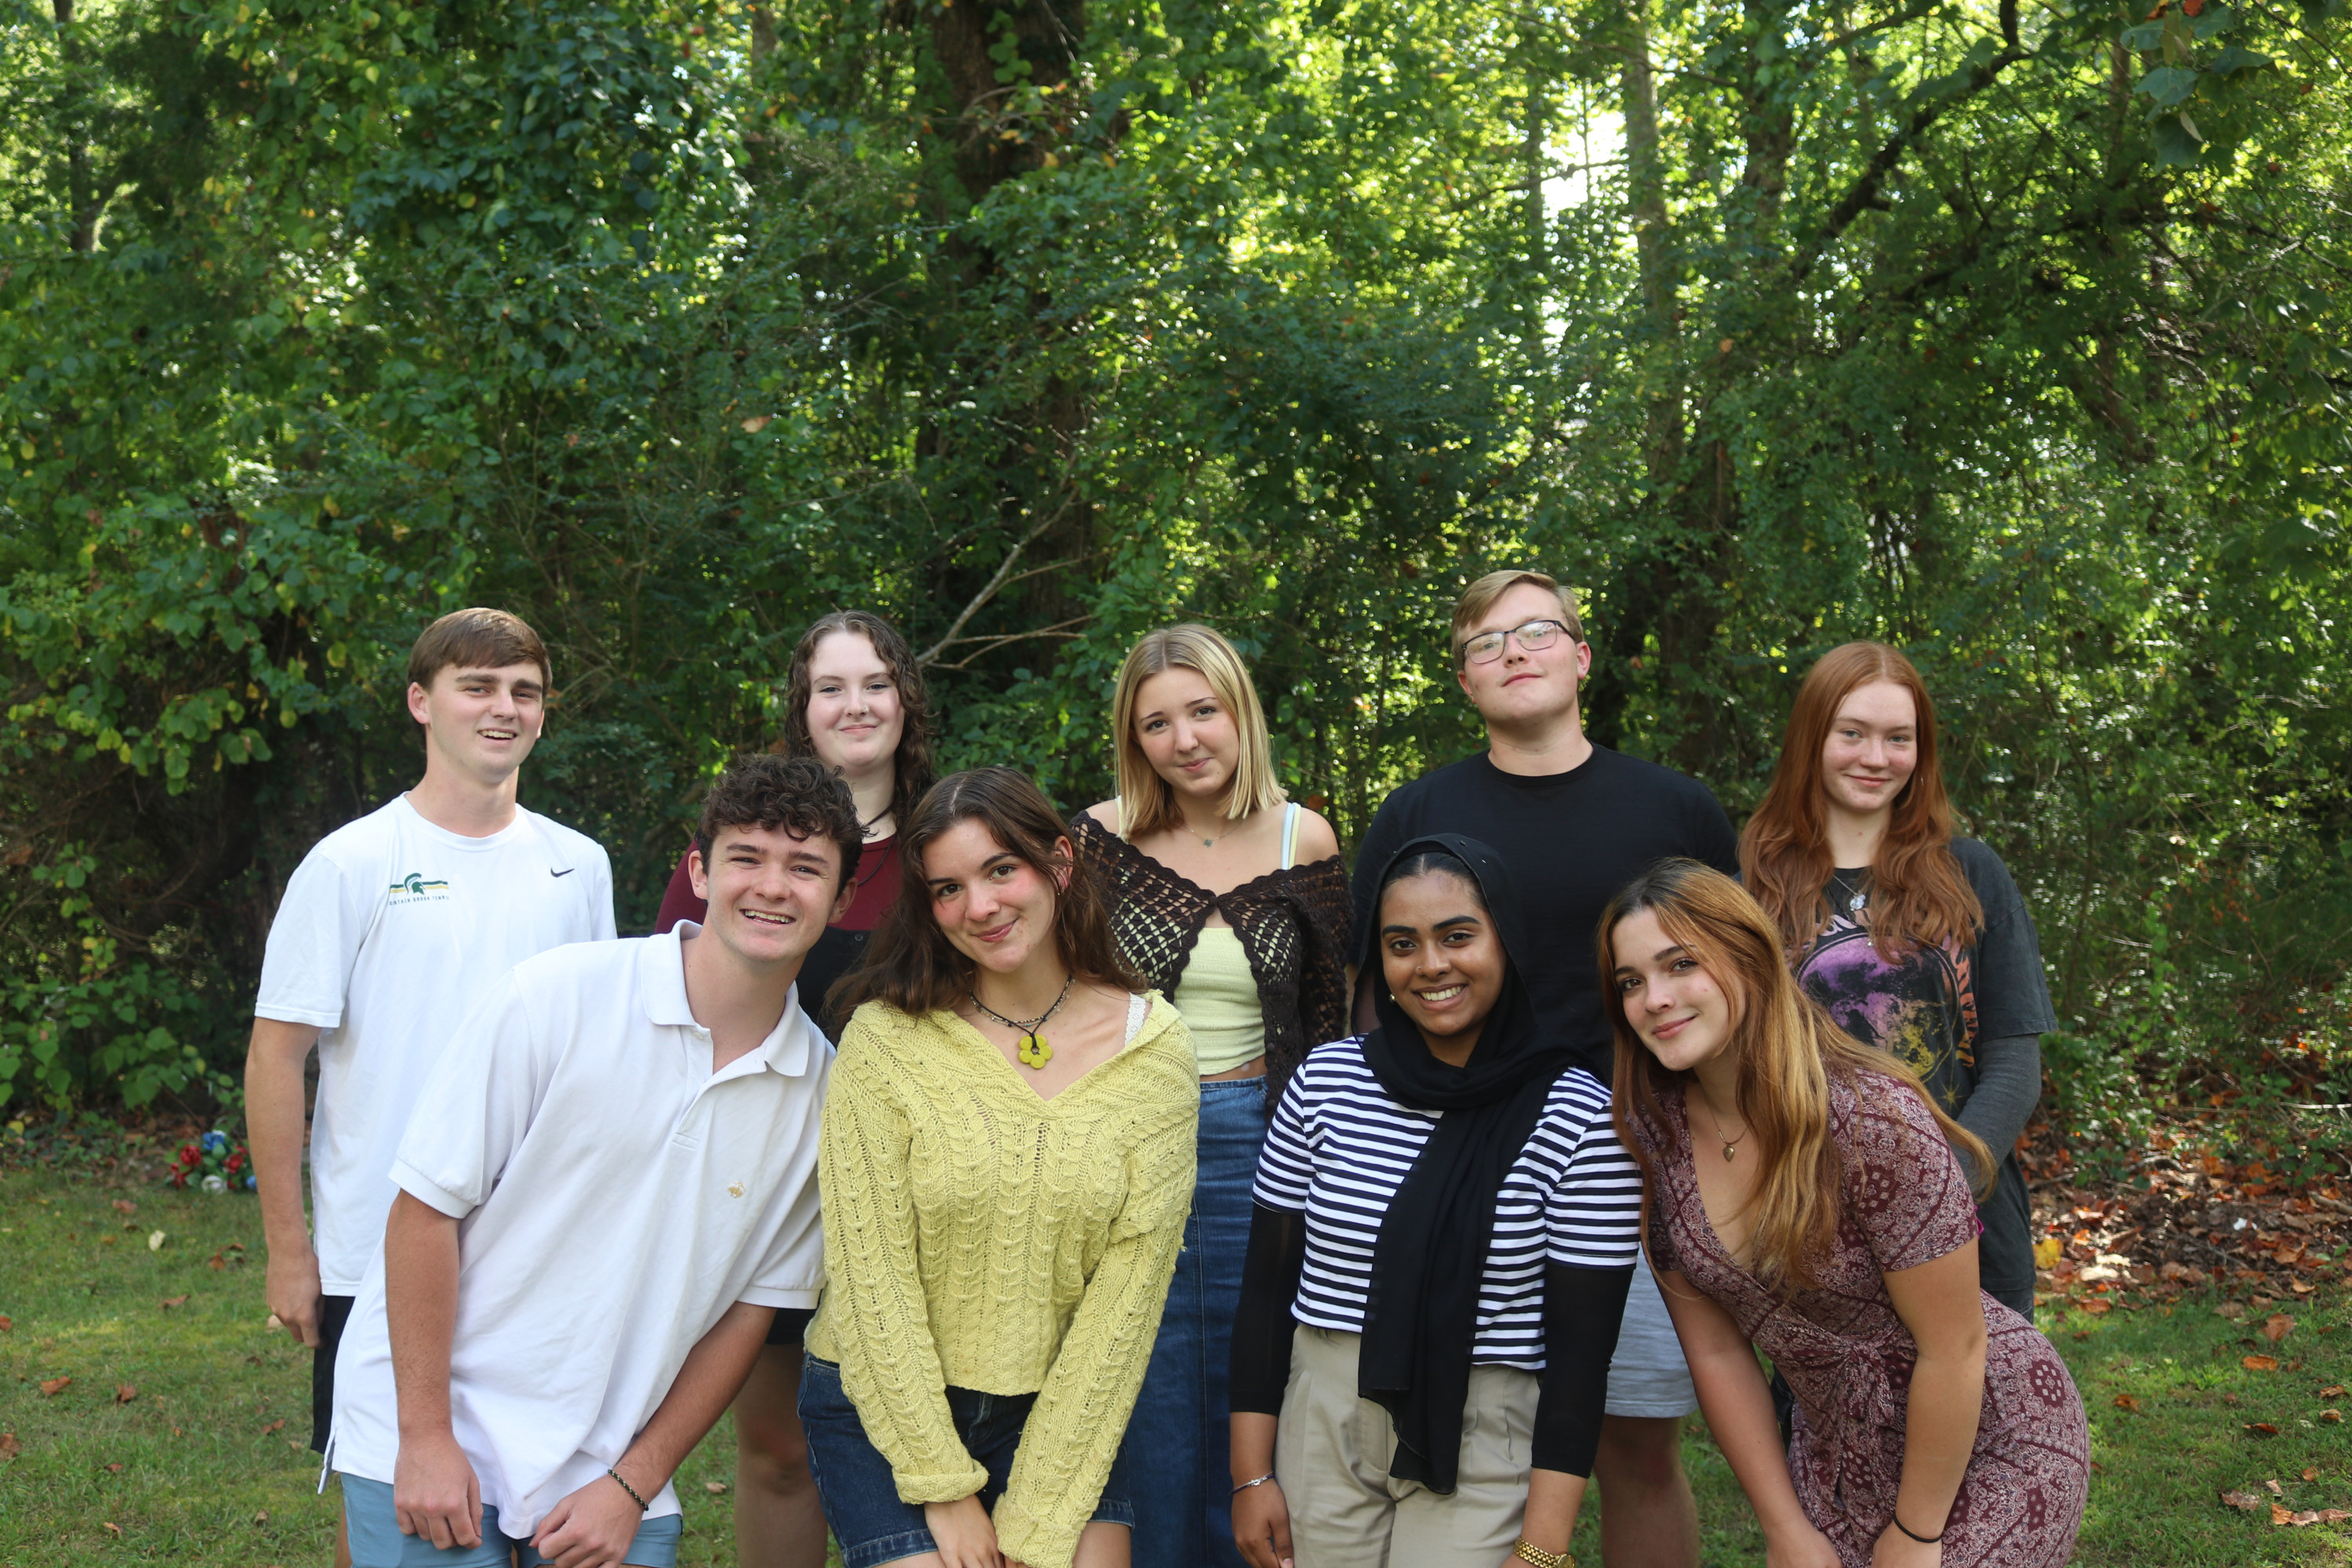 (Pictured from left to right bottom row); Will Snead, Macon, Ga.; Ellie Graham, Maryville, Tenn.: Jawaria Jaleel, Pakistan; and Rachel Wassung, Melbourne Beach, Fla. (Pictured from left to right top row); Trey Stiles, Mountain Brook, Ala.; Julia Daniels, Roswell, Ga.; Olivia Moellering Baratas, Decatur, Ga.; Atticus Kowalski, Antioch, Tenn., and Mohana Buckley, New York City, N.Y. (Not pictured: Ava Hines, Homewood, Ala.; Eli Bastiaansen, Colorado Springs, Colo.; and Ivy Shushok, Salem, Mass.)